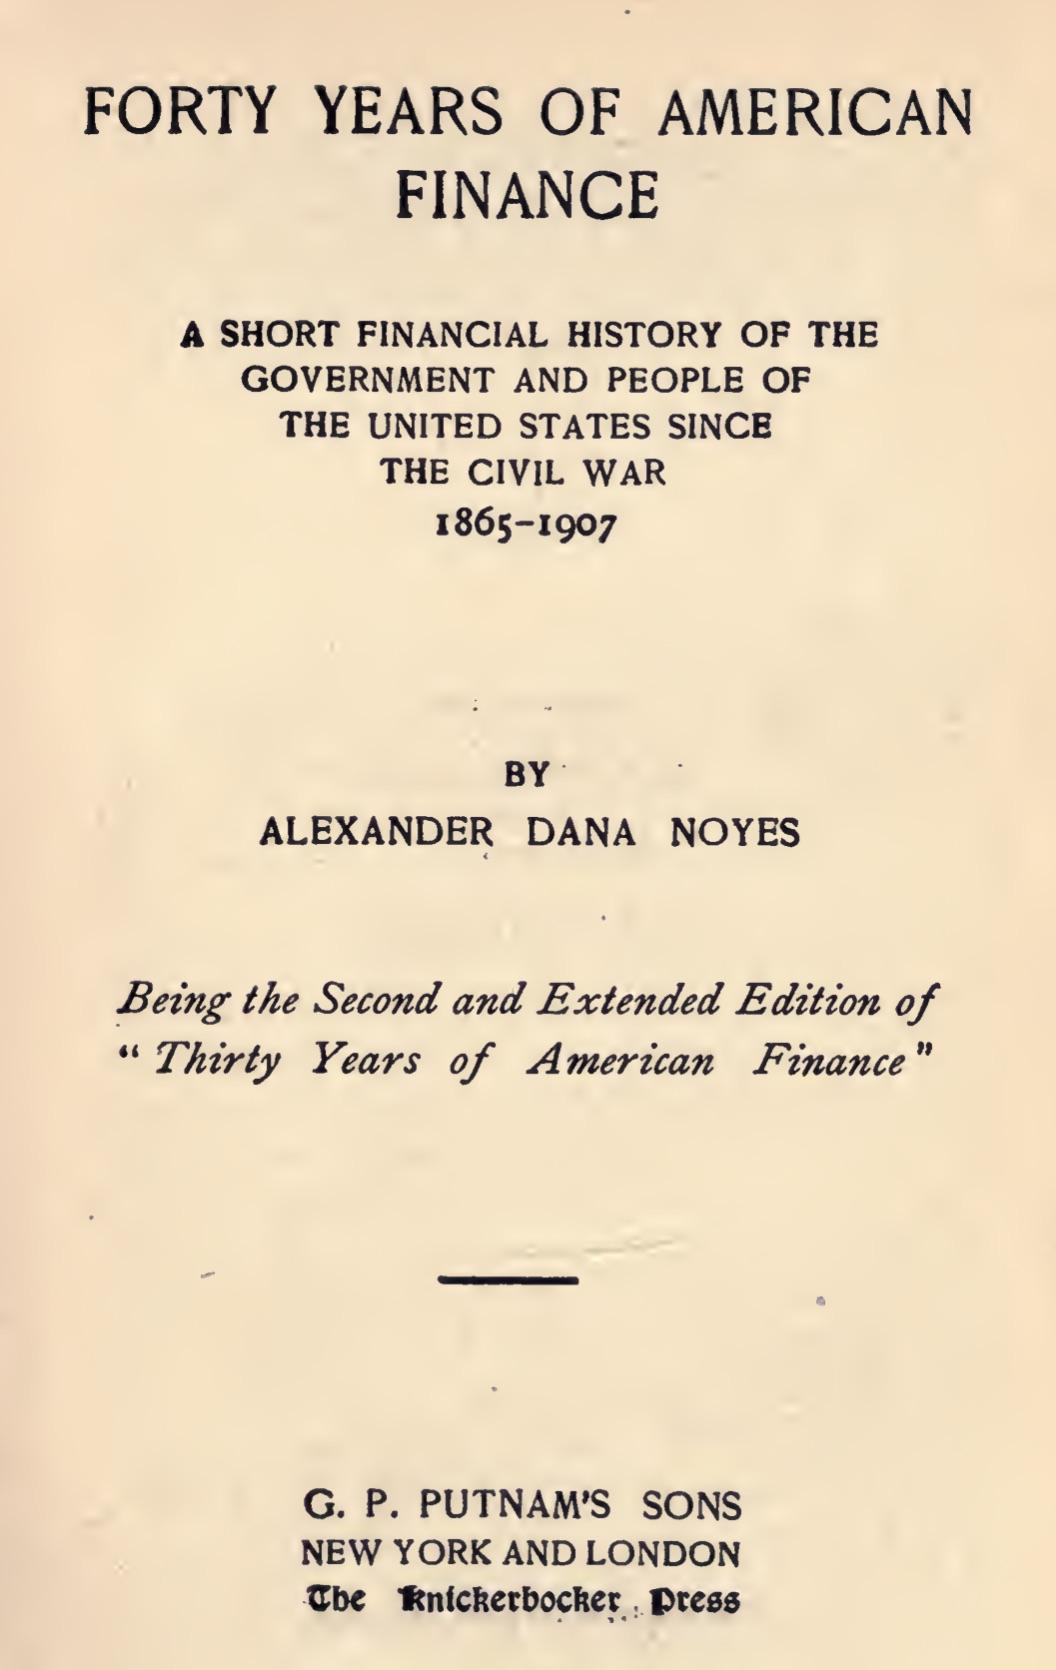 Forty Years of American Finance (1909) by Alexander Dana Noyes